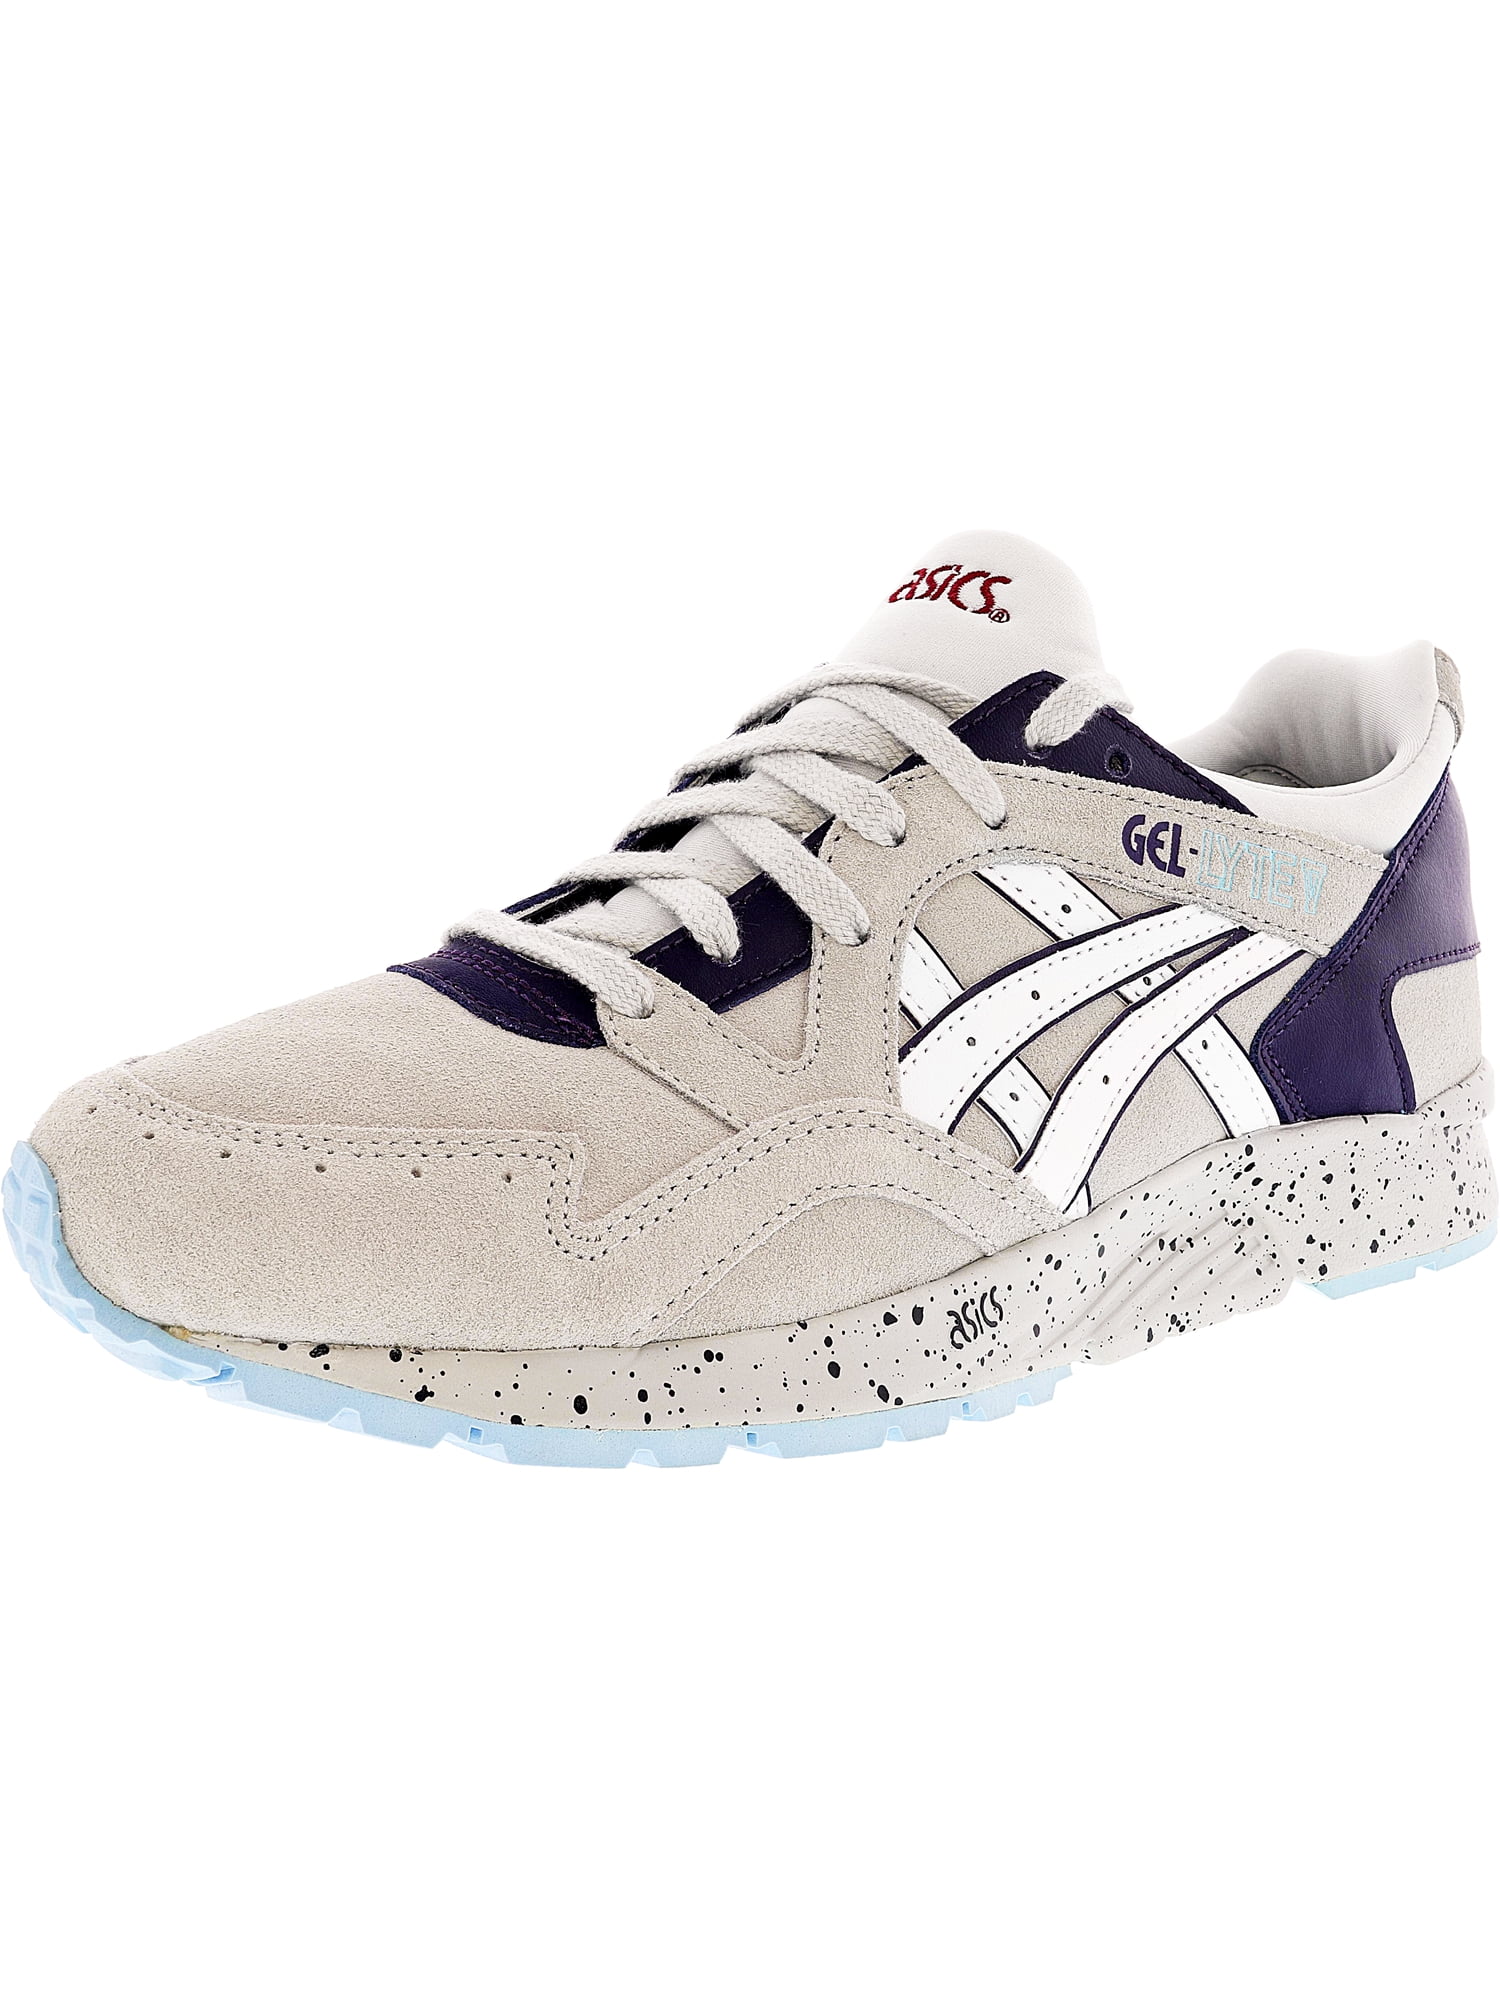 asics all leather women's